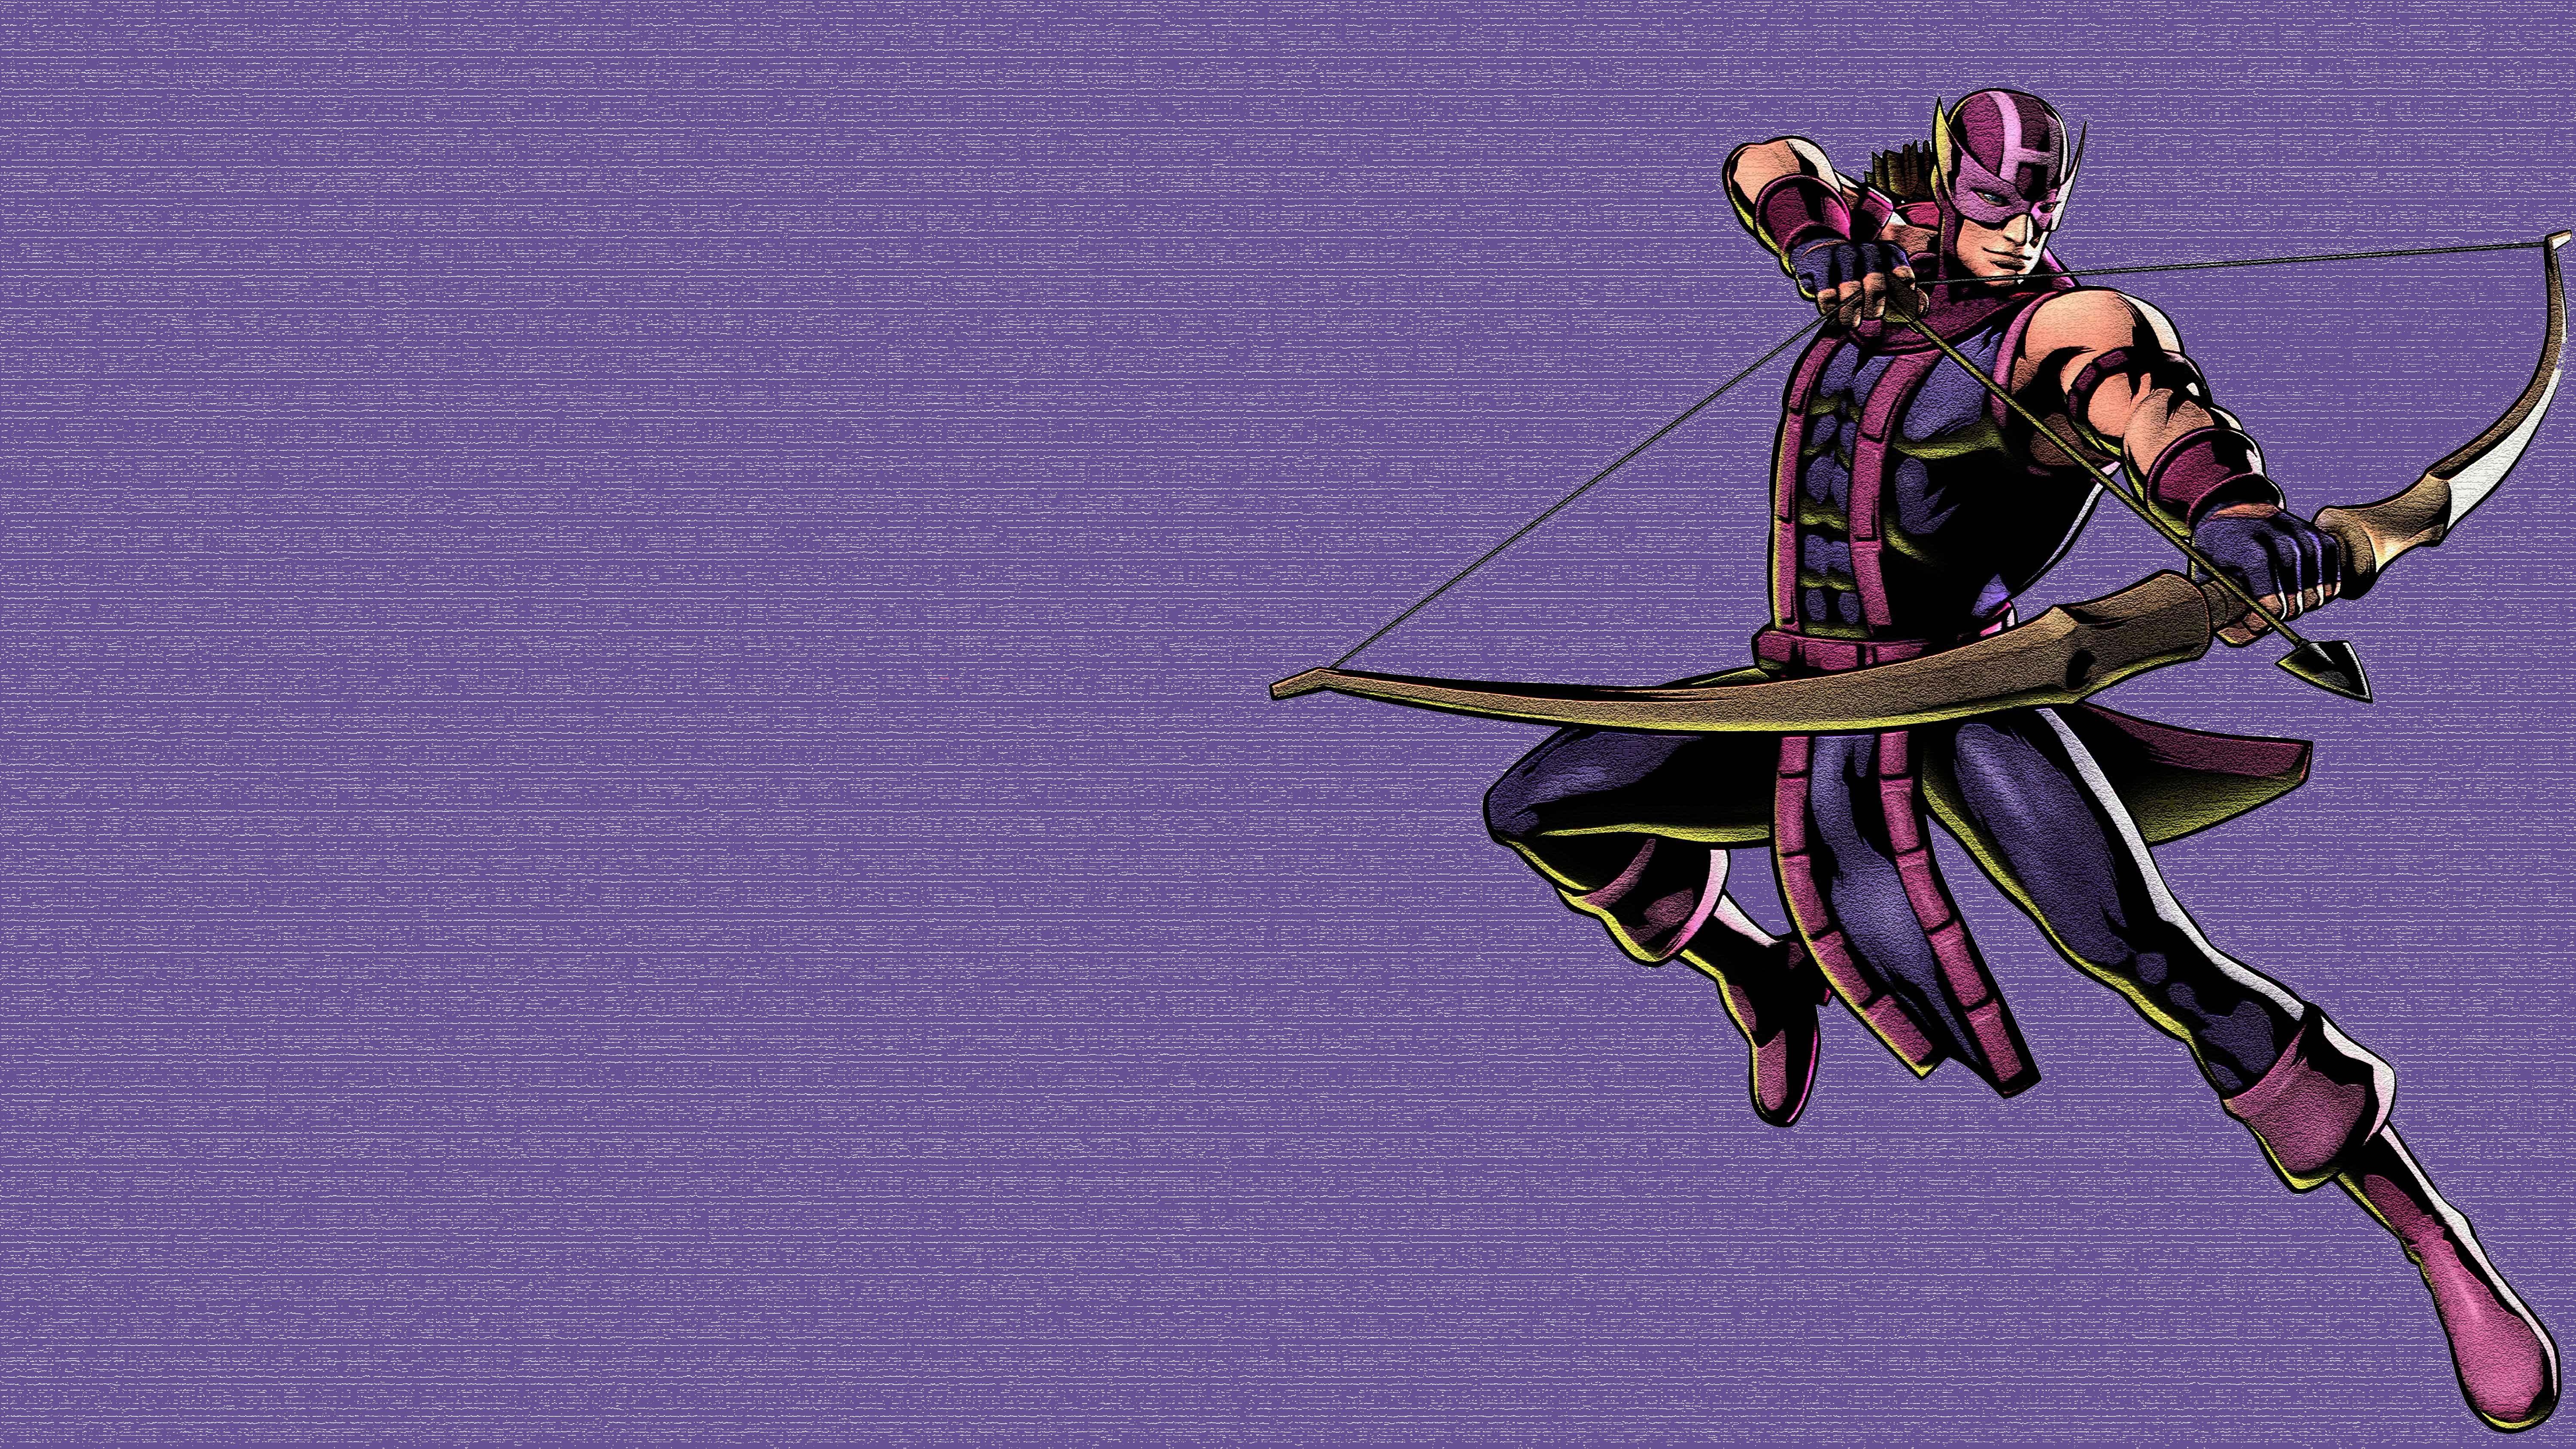 Hawkeye HD Wallpaper and Background Image